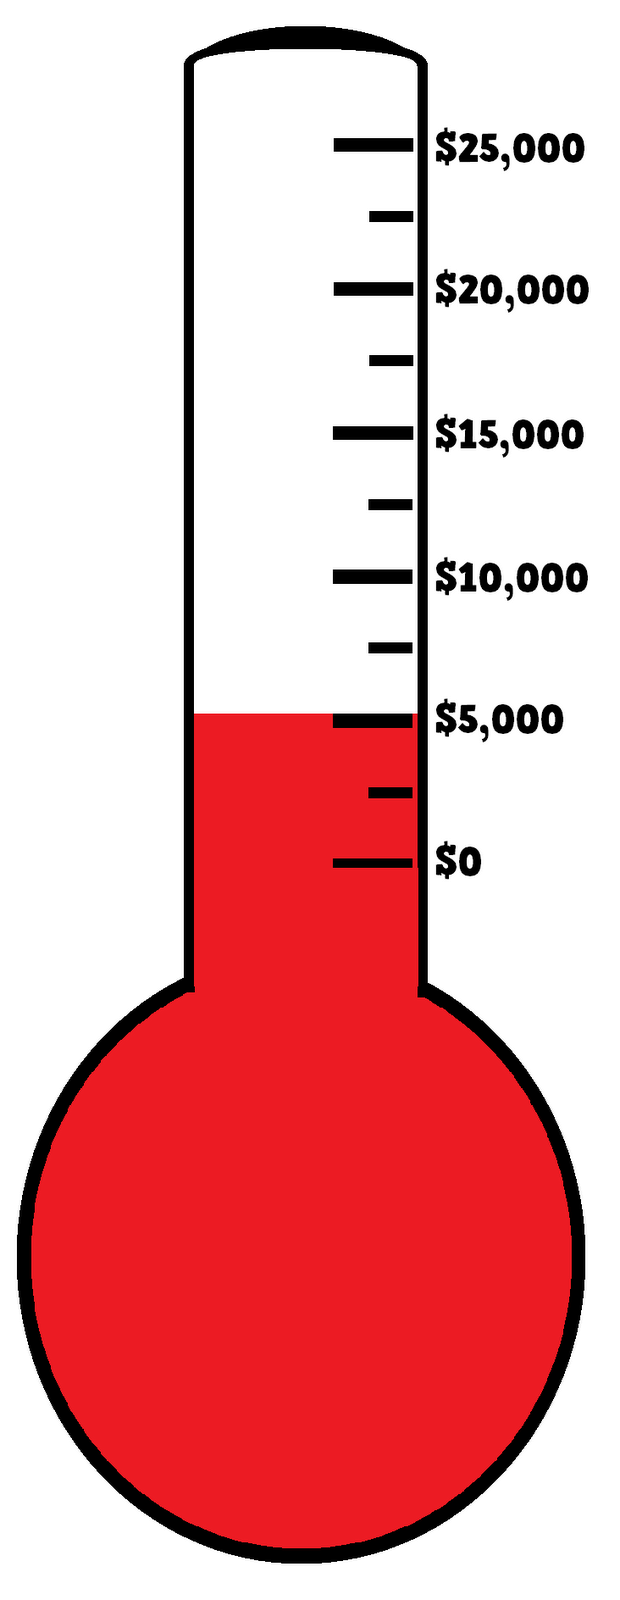 Fundraising thermometer images.